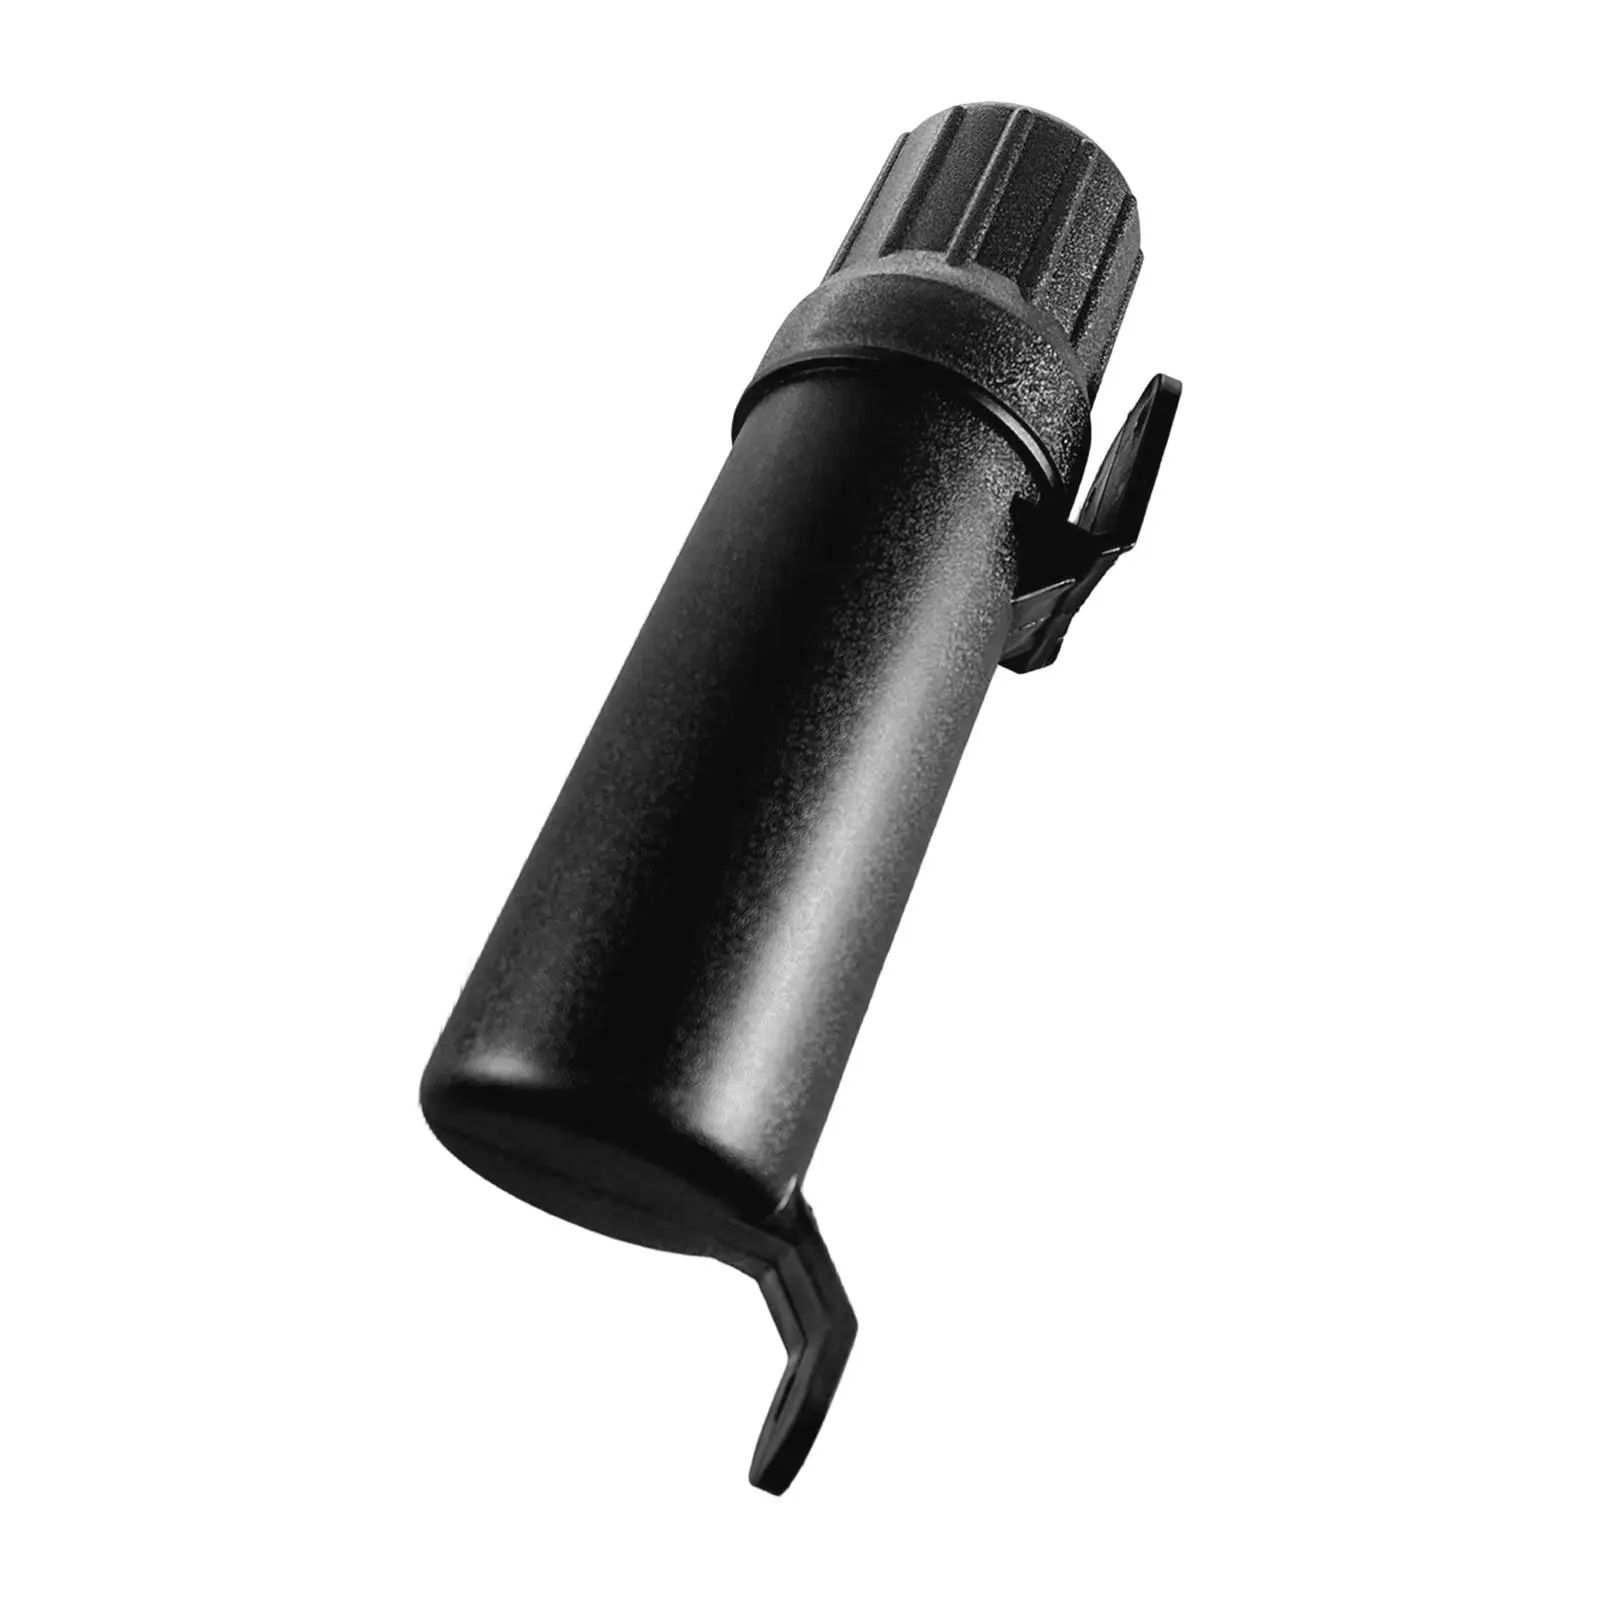 Universal Motorcycle Tool Tube Waterproof Professional Replaces Durable Easy to